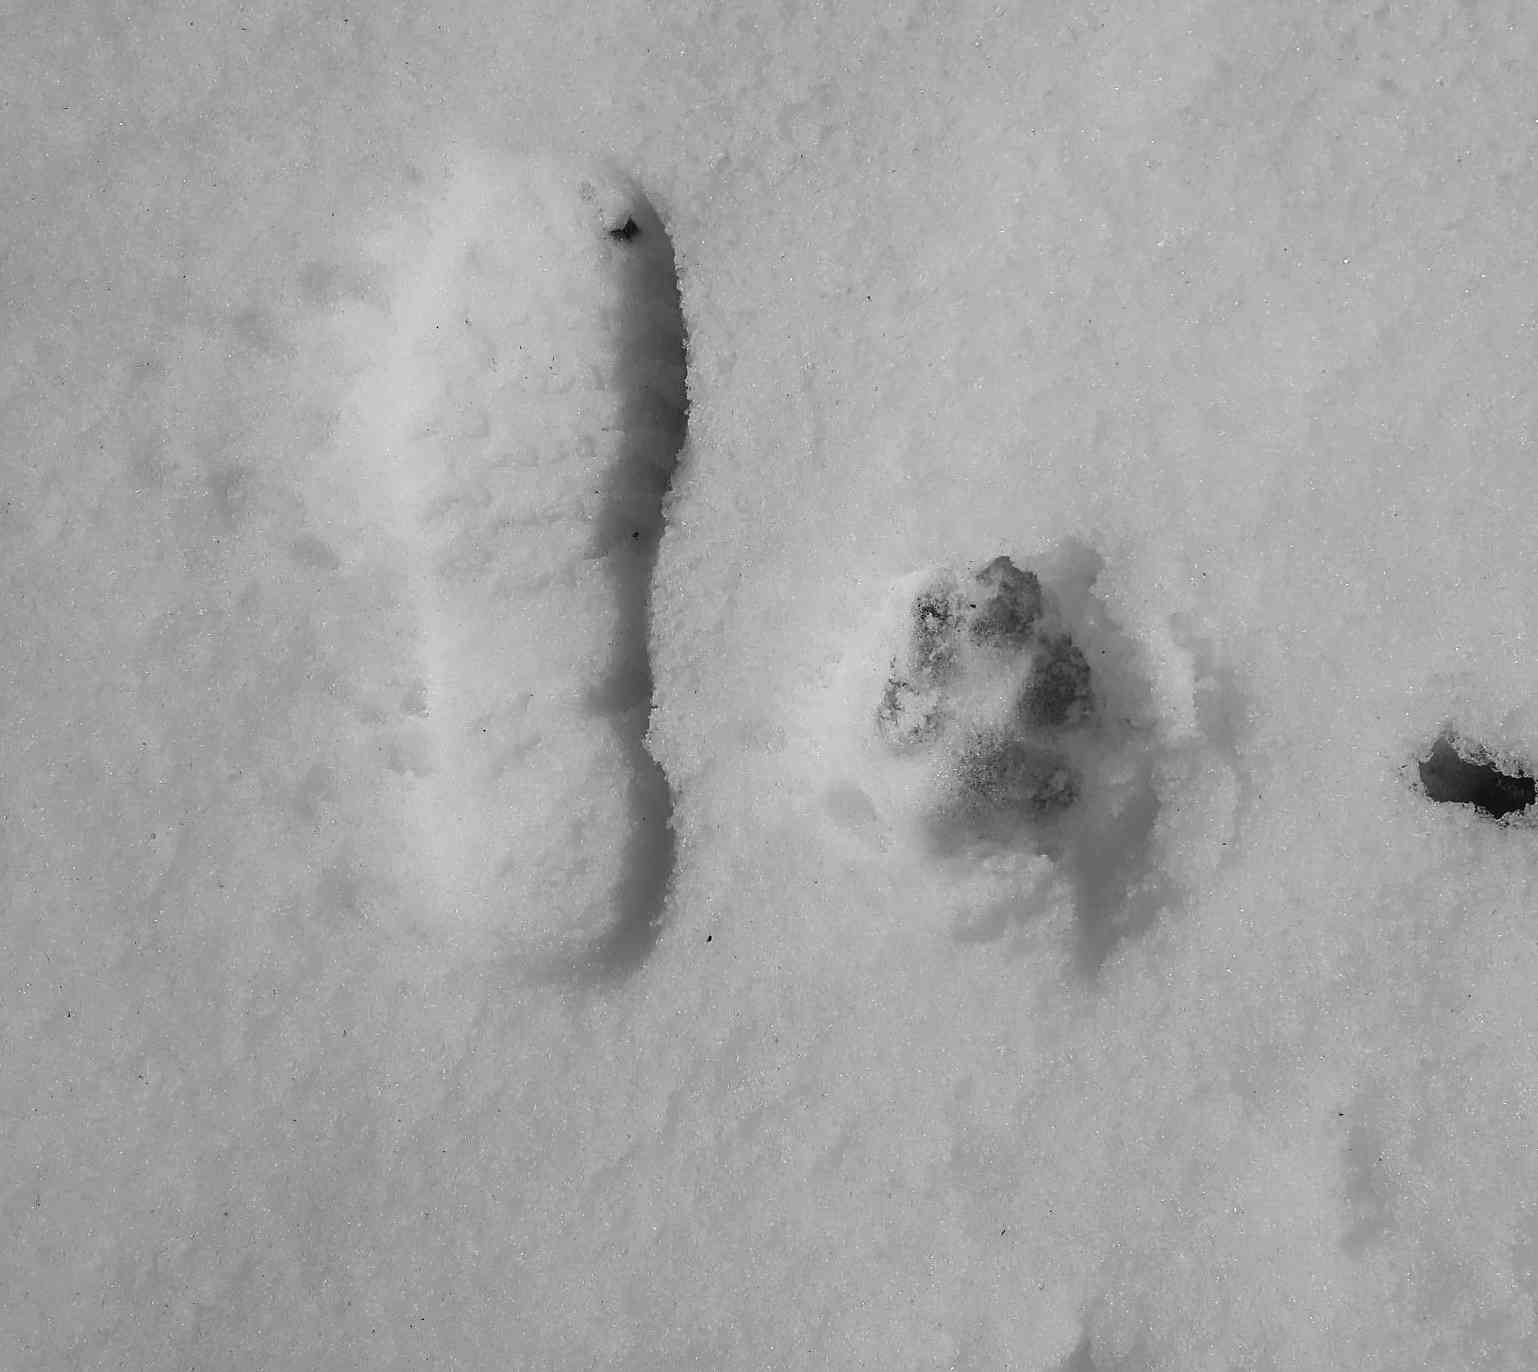 Footprint and Mexican gray wolf paw print 